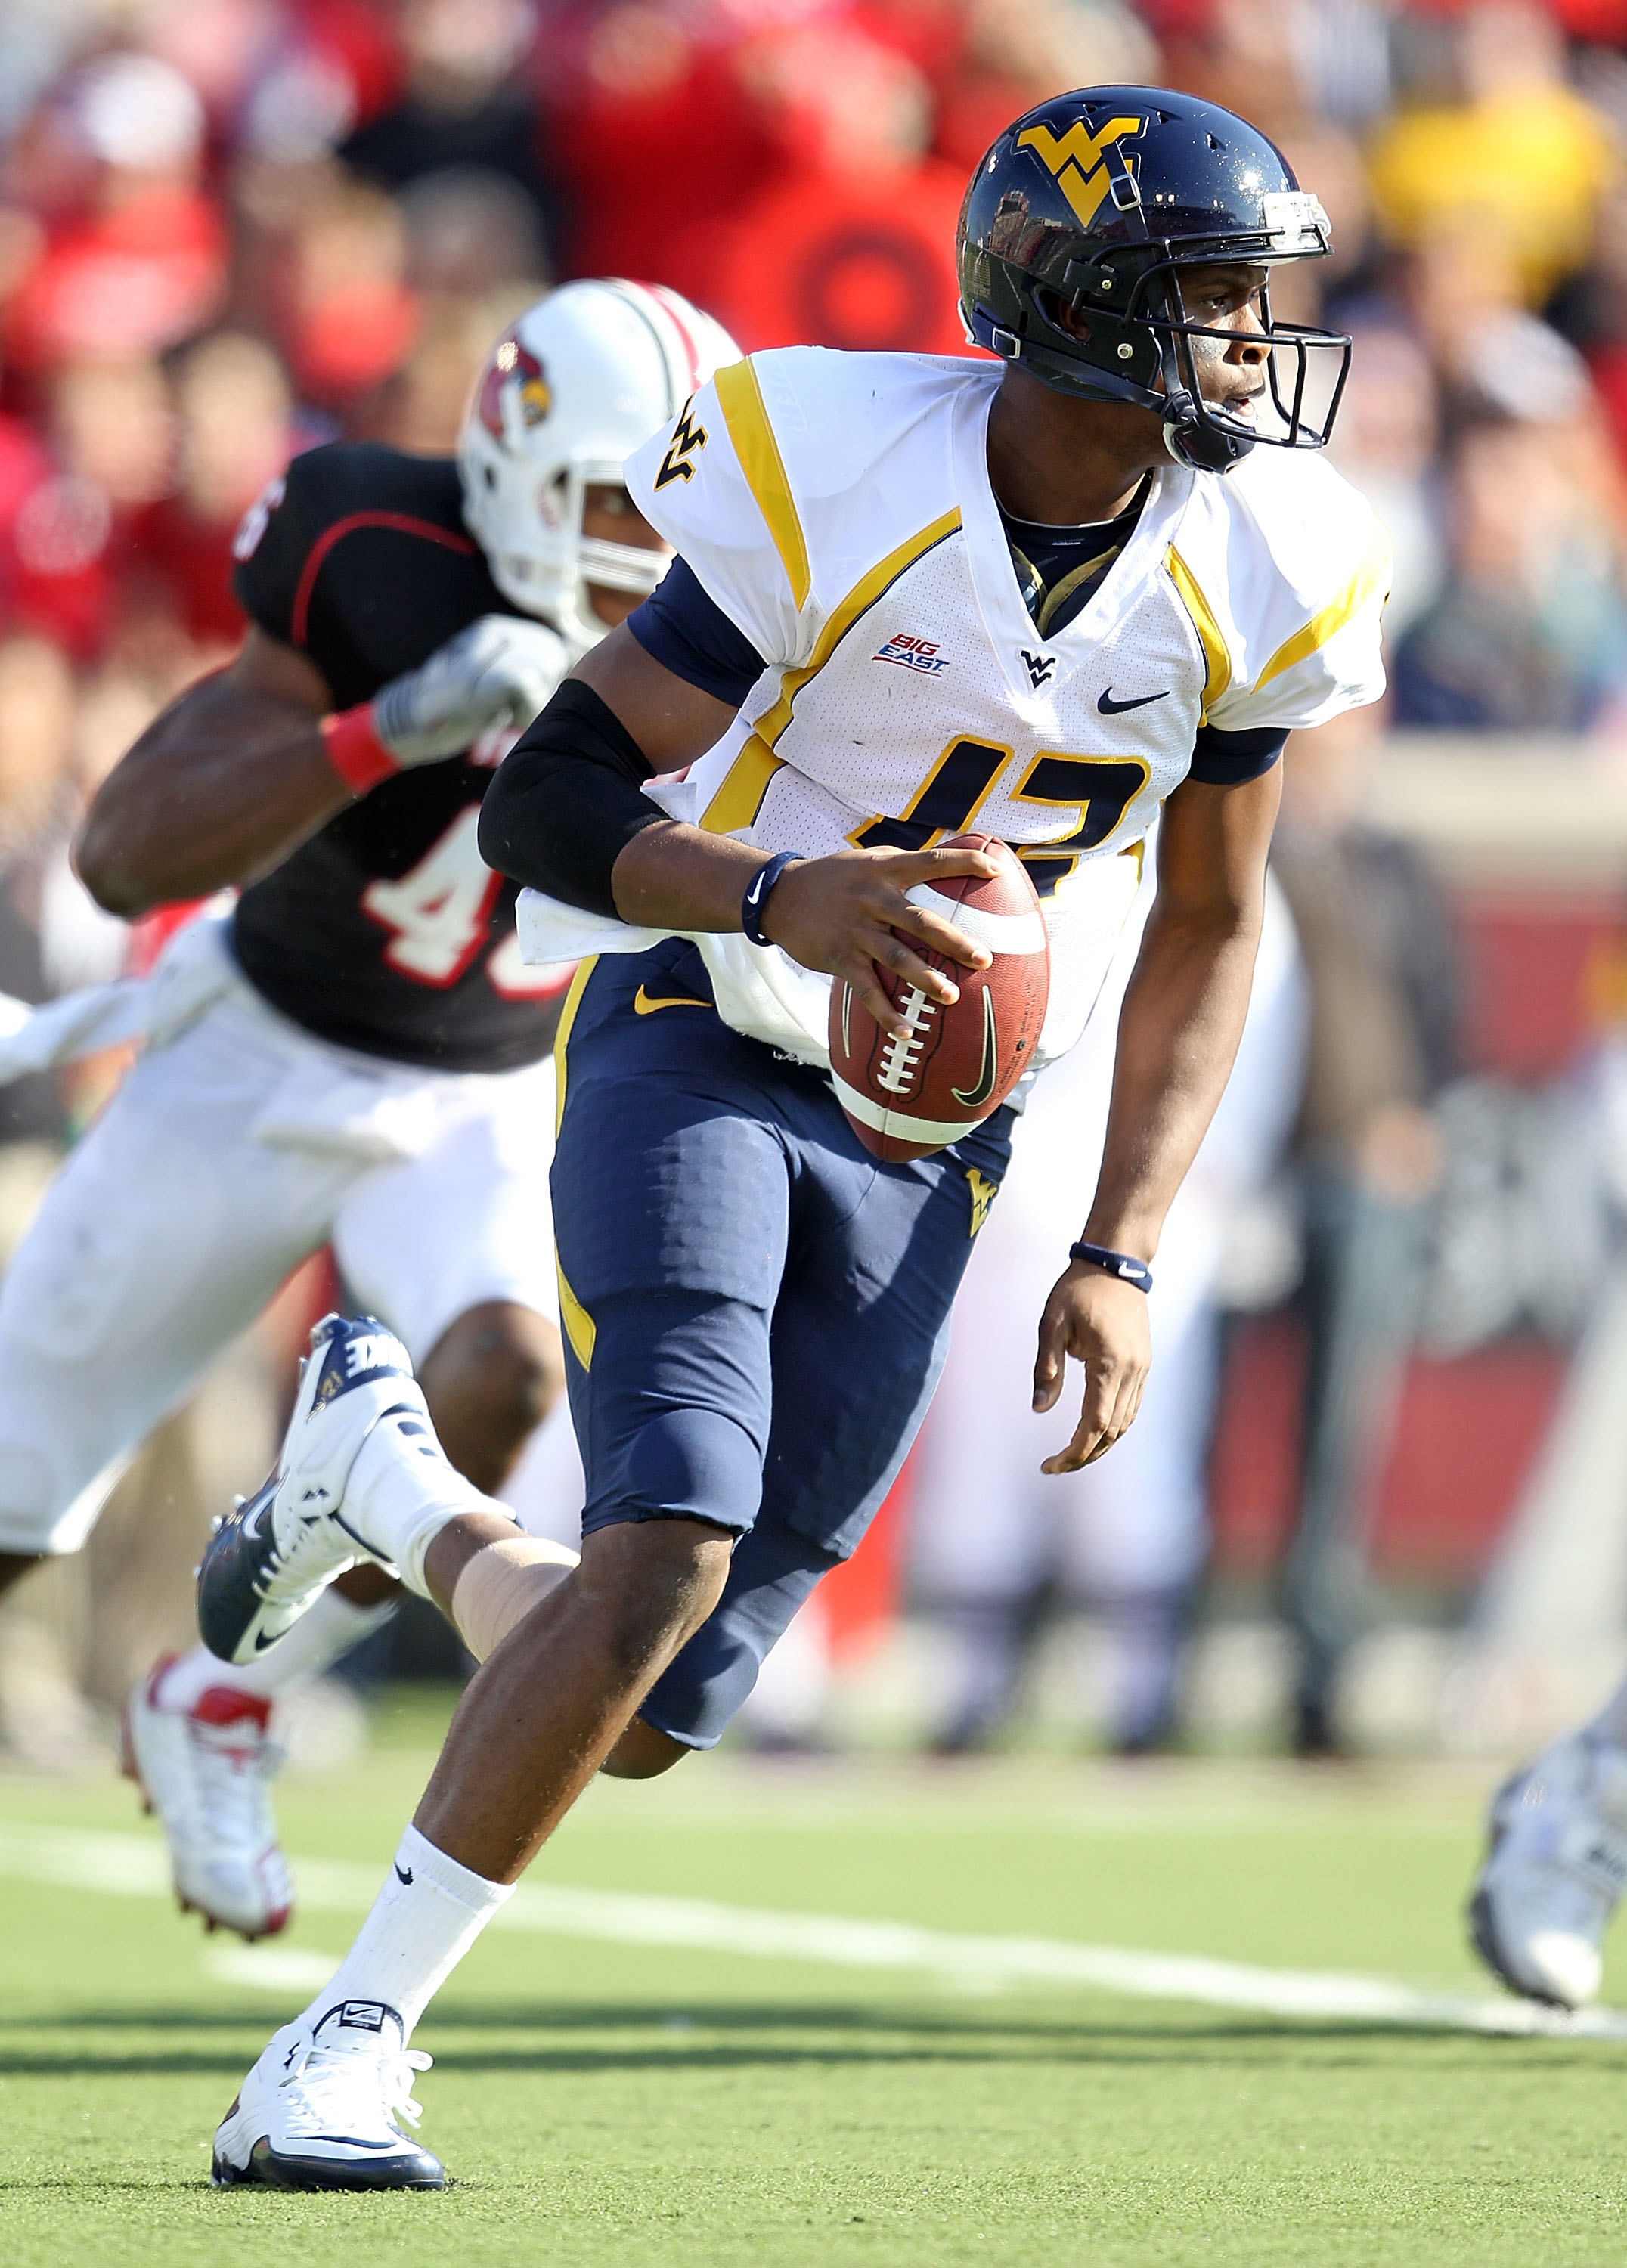 LOUISVILLE, KY - NOVEMBER 20:  Geno Smith#12 of the West Virginia Mountaineers runs with the ball during the Big East Conference game against the Louisville Cardinals at Papa John's Cardinal Stadium on November 20, 2010 in Louisville, Kentucky.  (Photo by